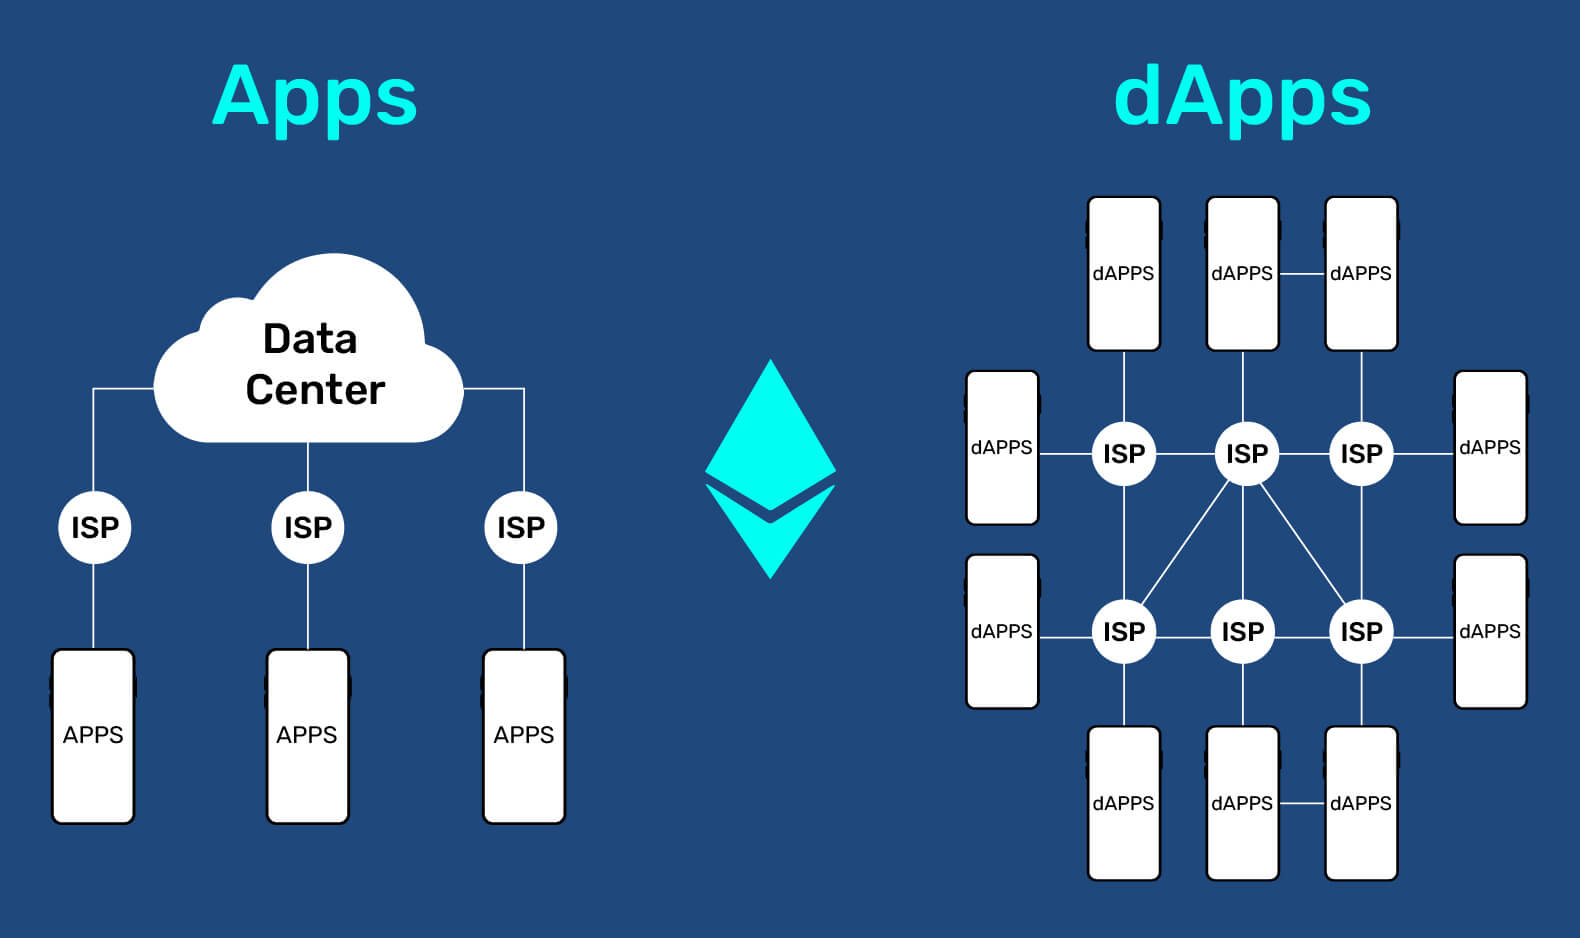 Apps and dApps